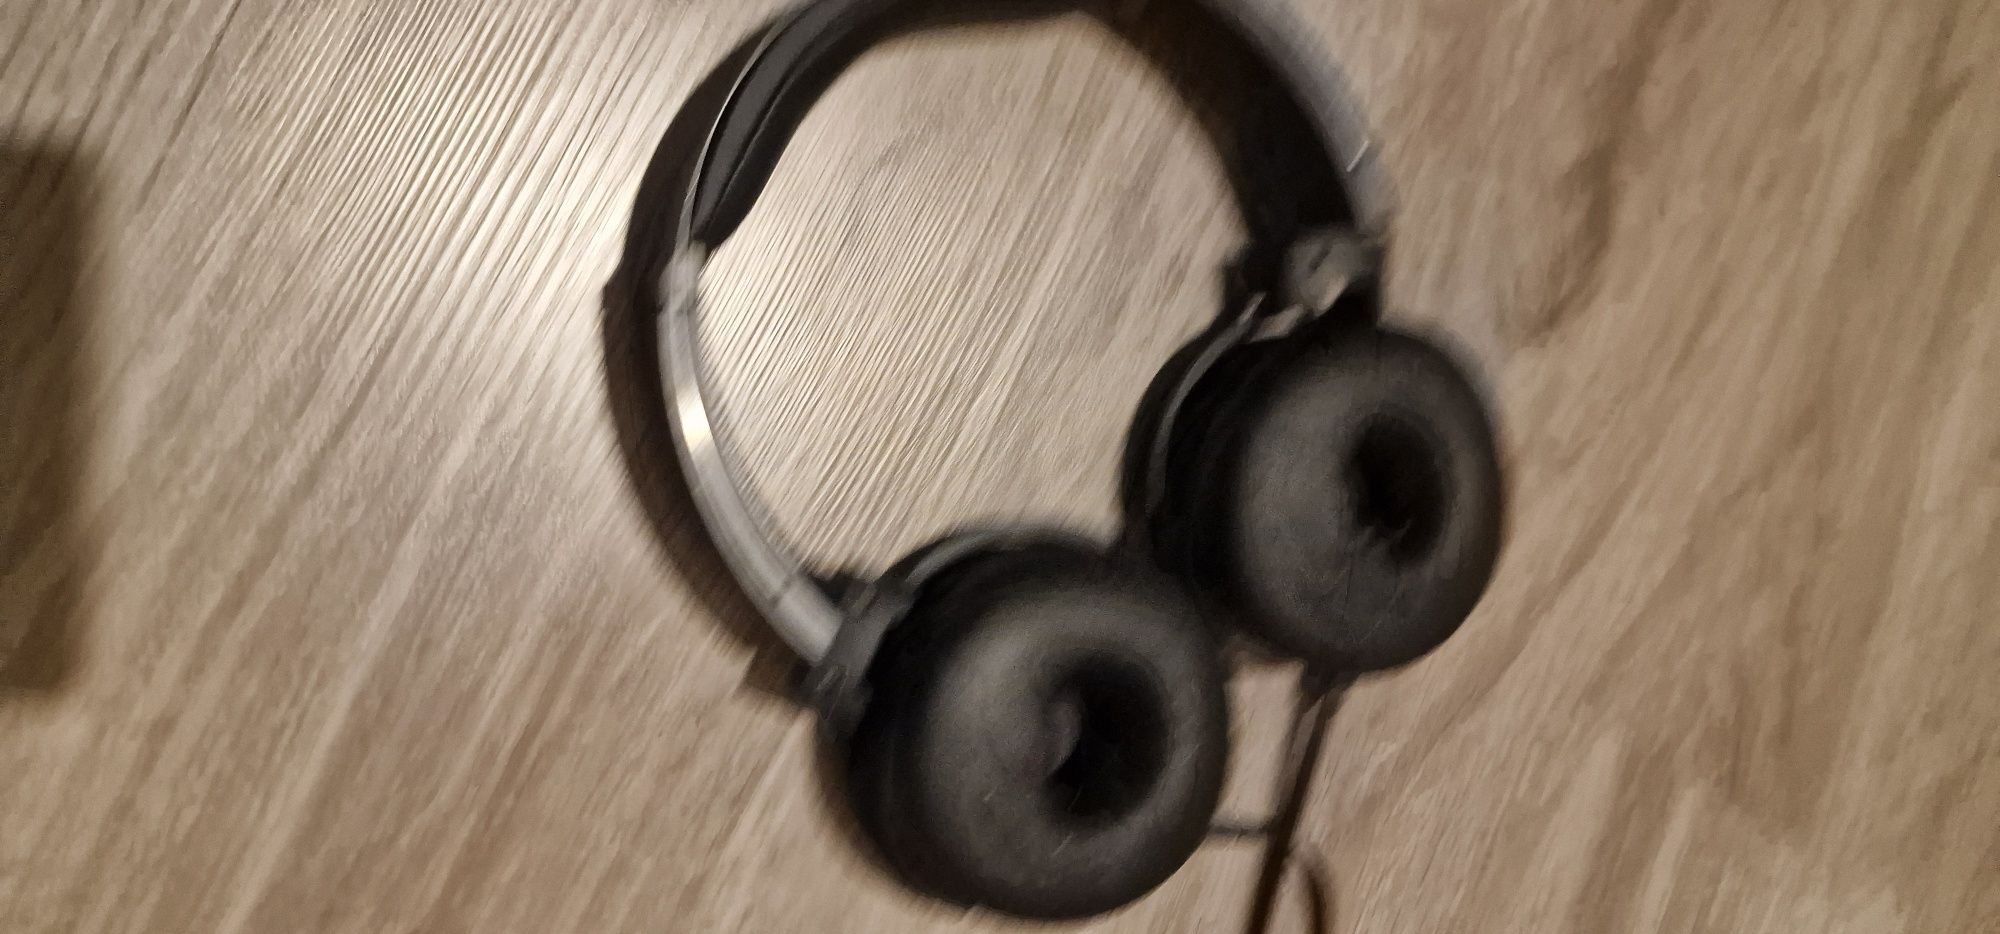 Phones Sony MDR-XB550